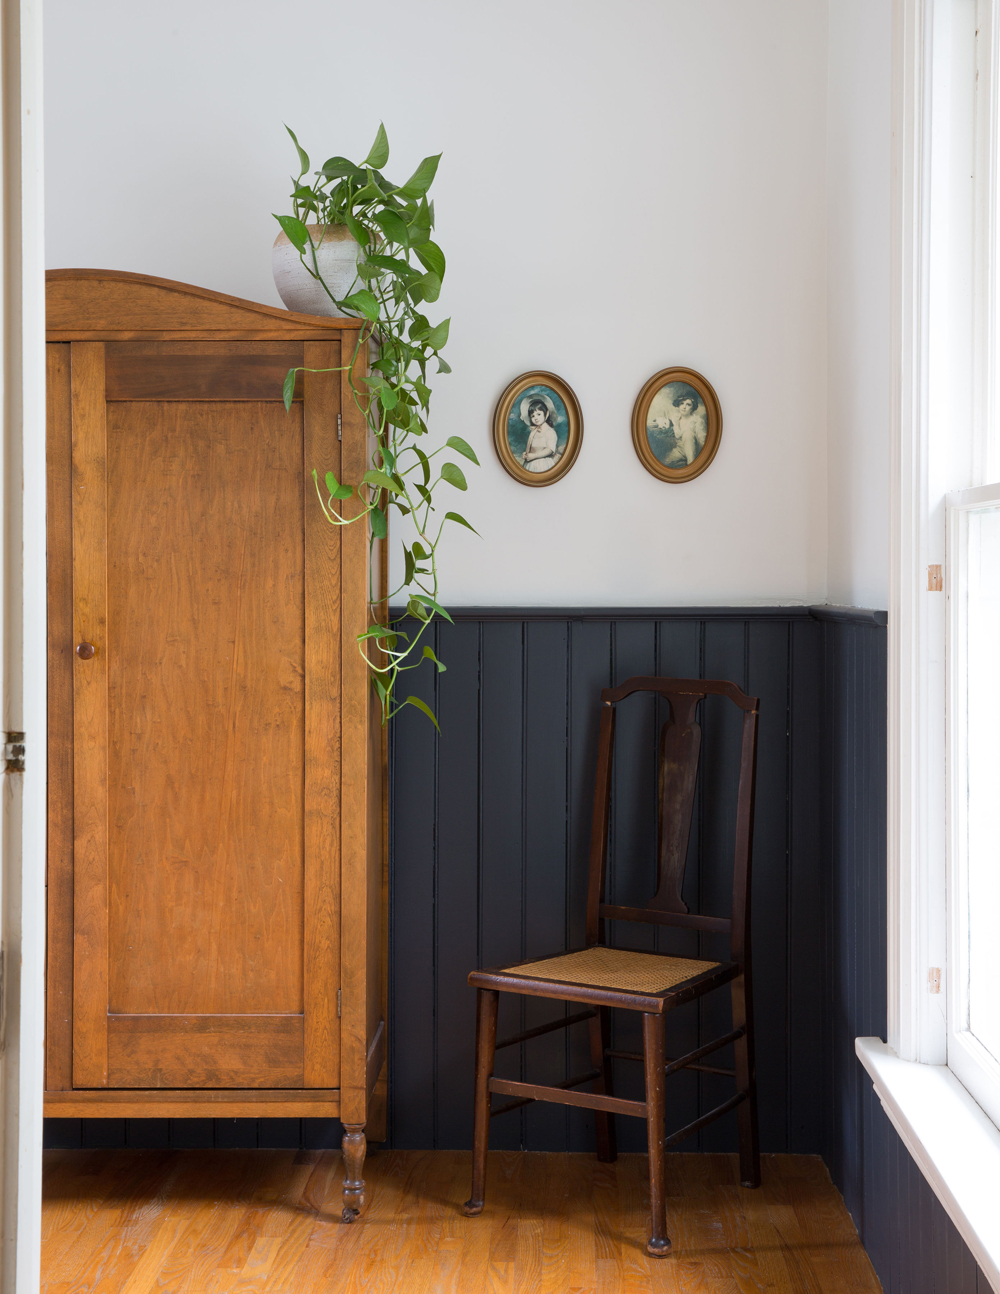 A vintage armoire and chair in the midnight blue bathroom